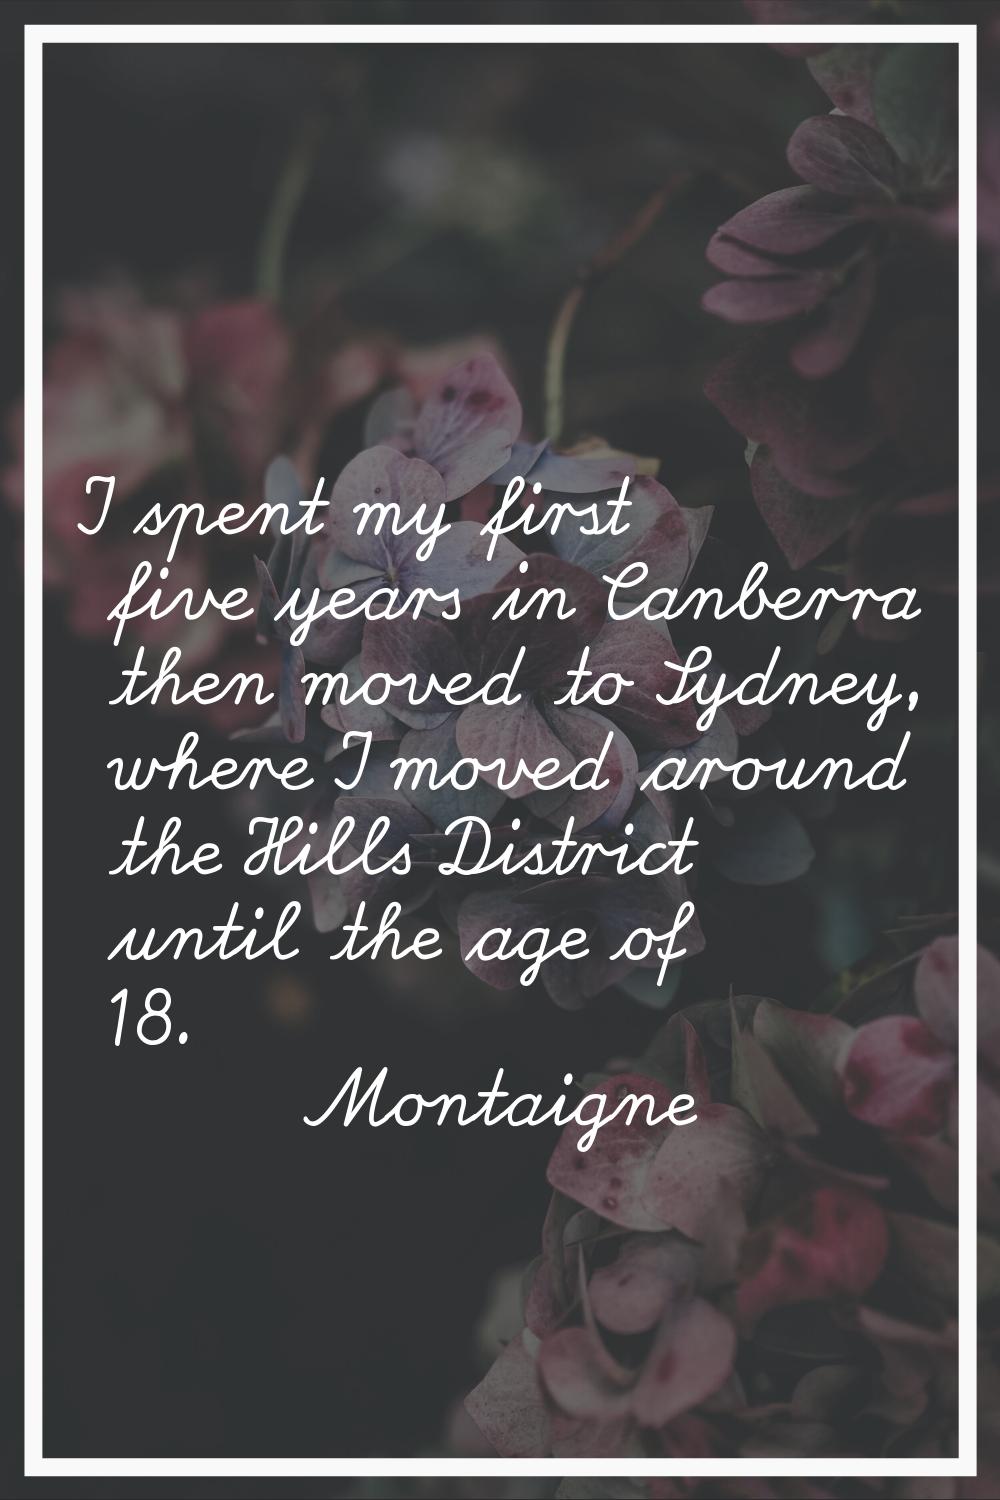 I spent my first five years in Canberra then moved to Sydney, where I moved around the Hills Distri